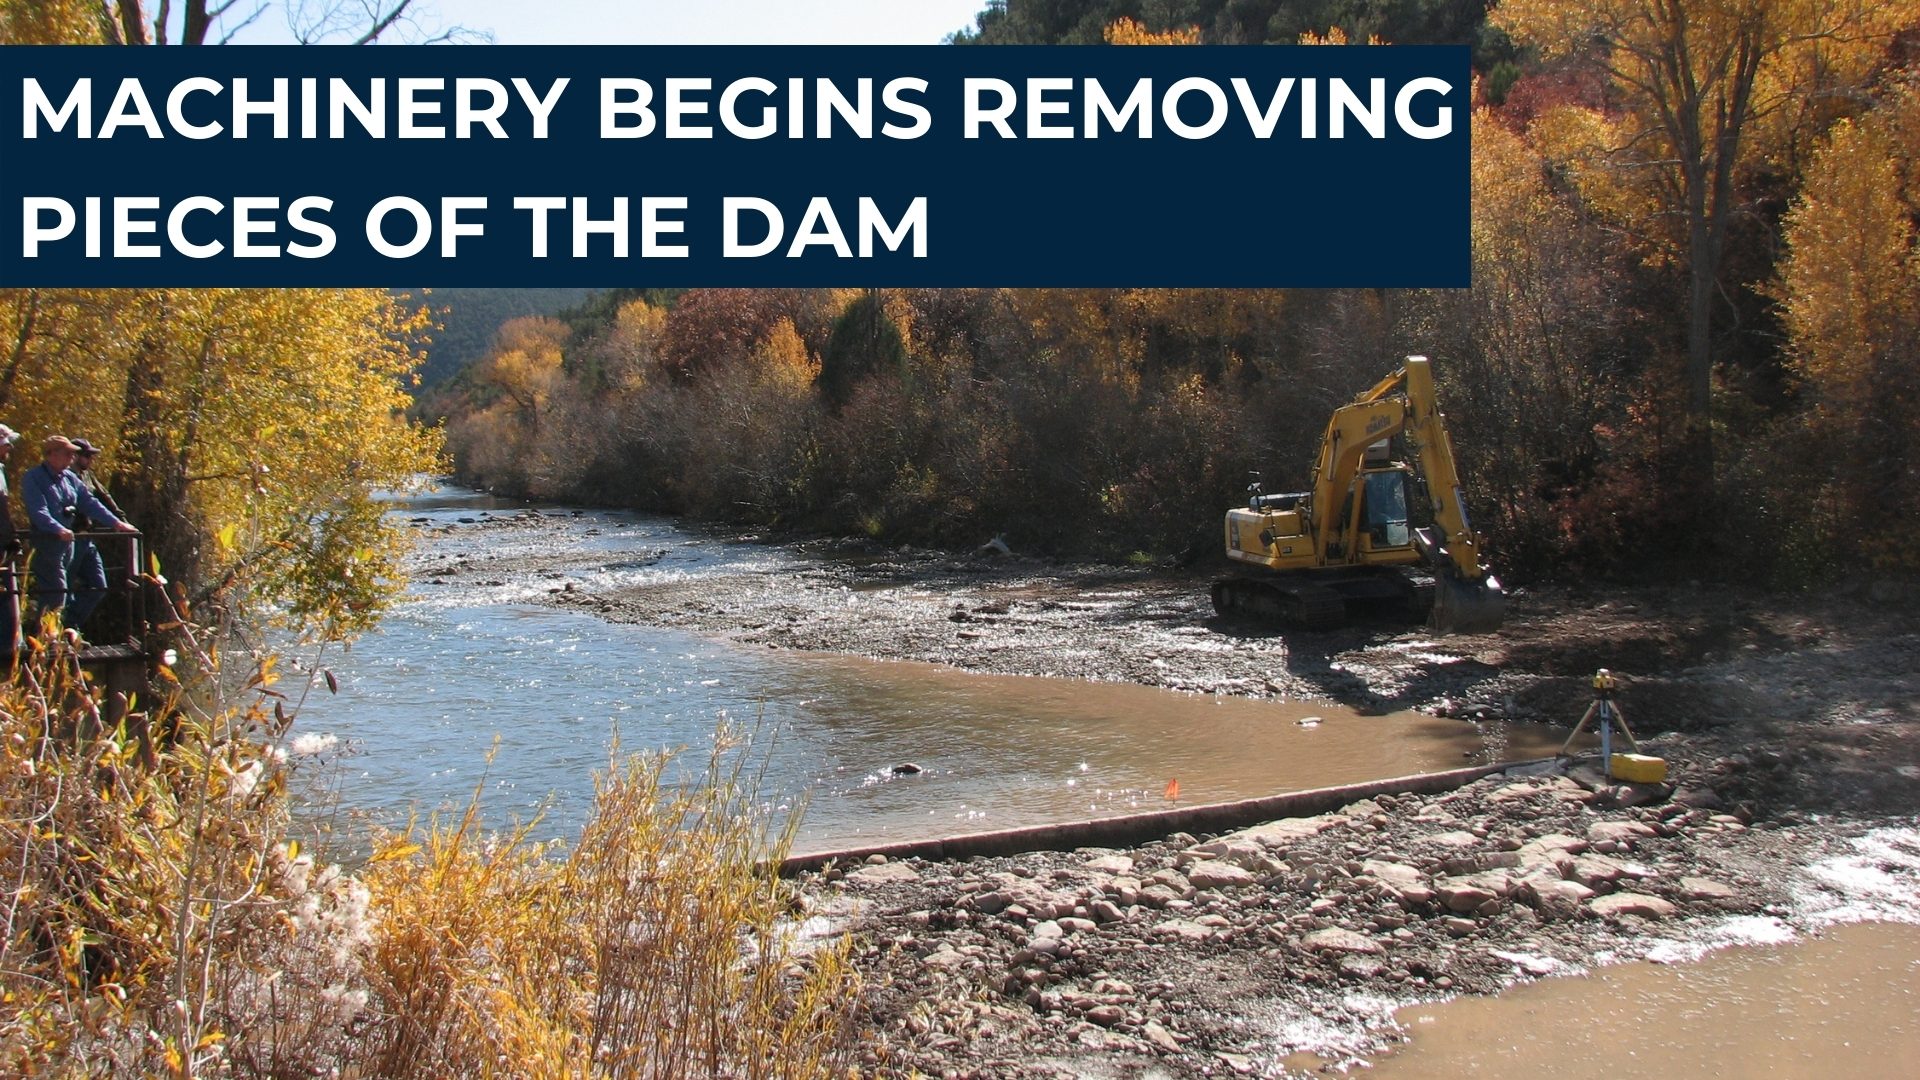 Machinery begins removing pieces of the dam